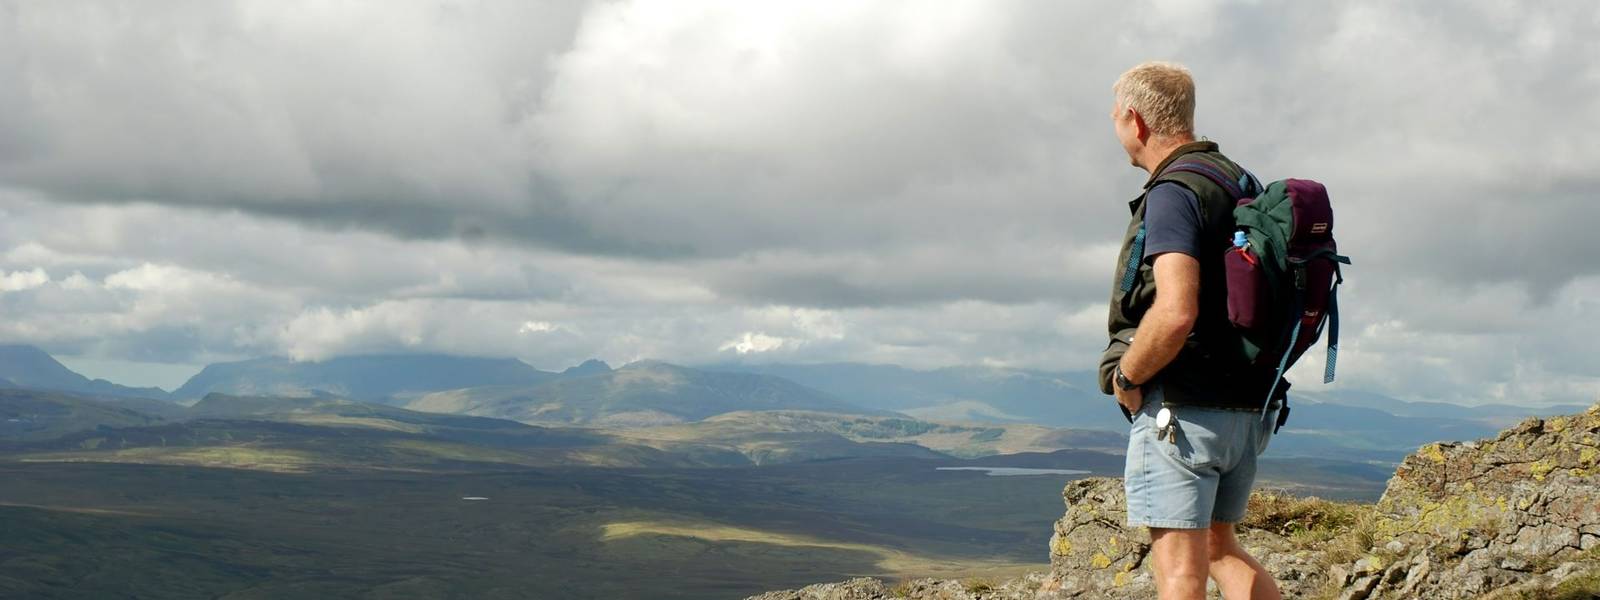 A climber on the summit of Arenig Fawr, Snowdonia, North Wales.